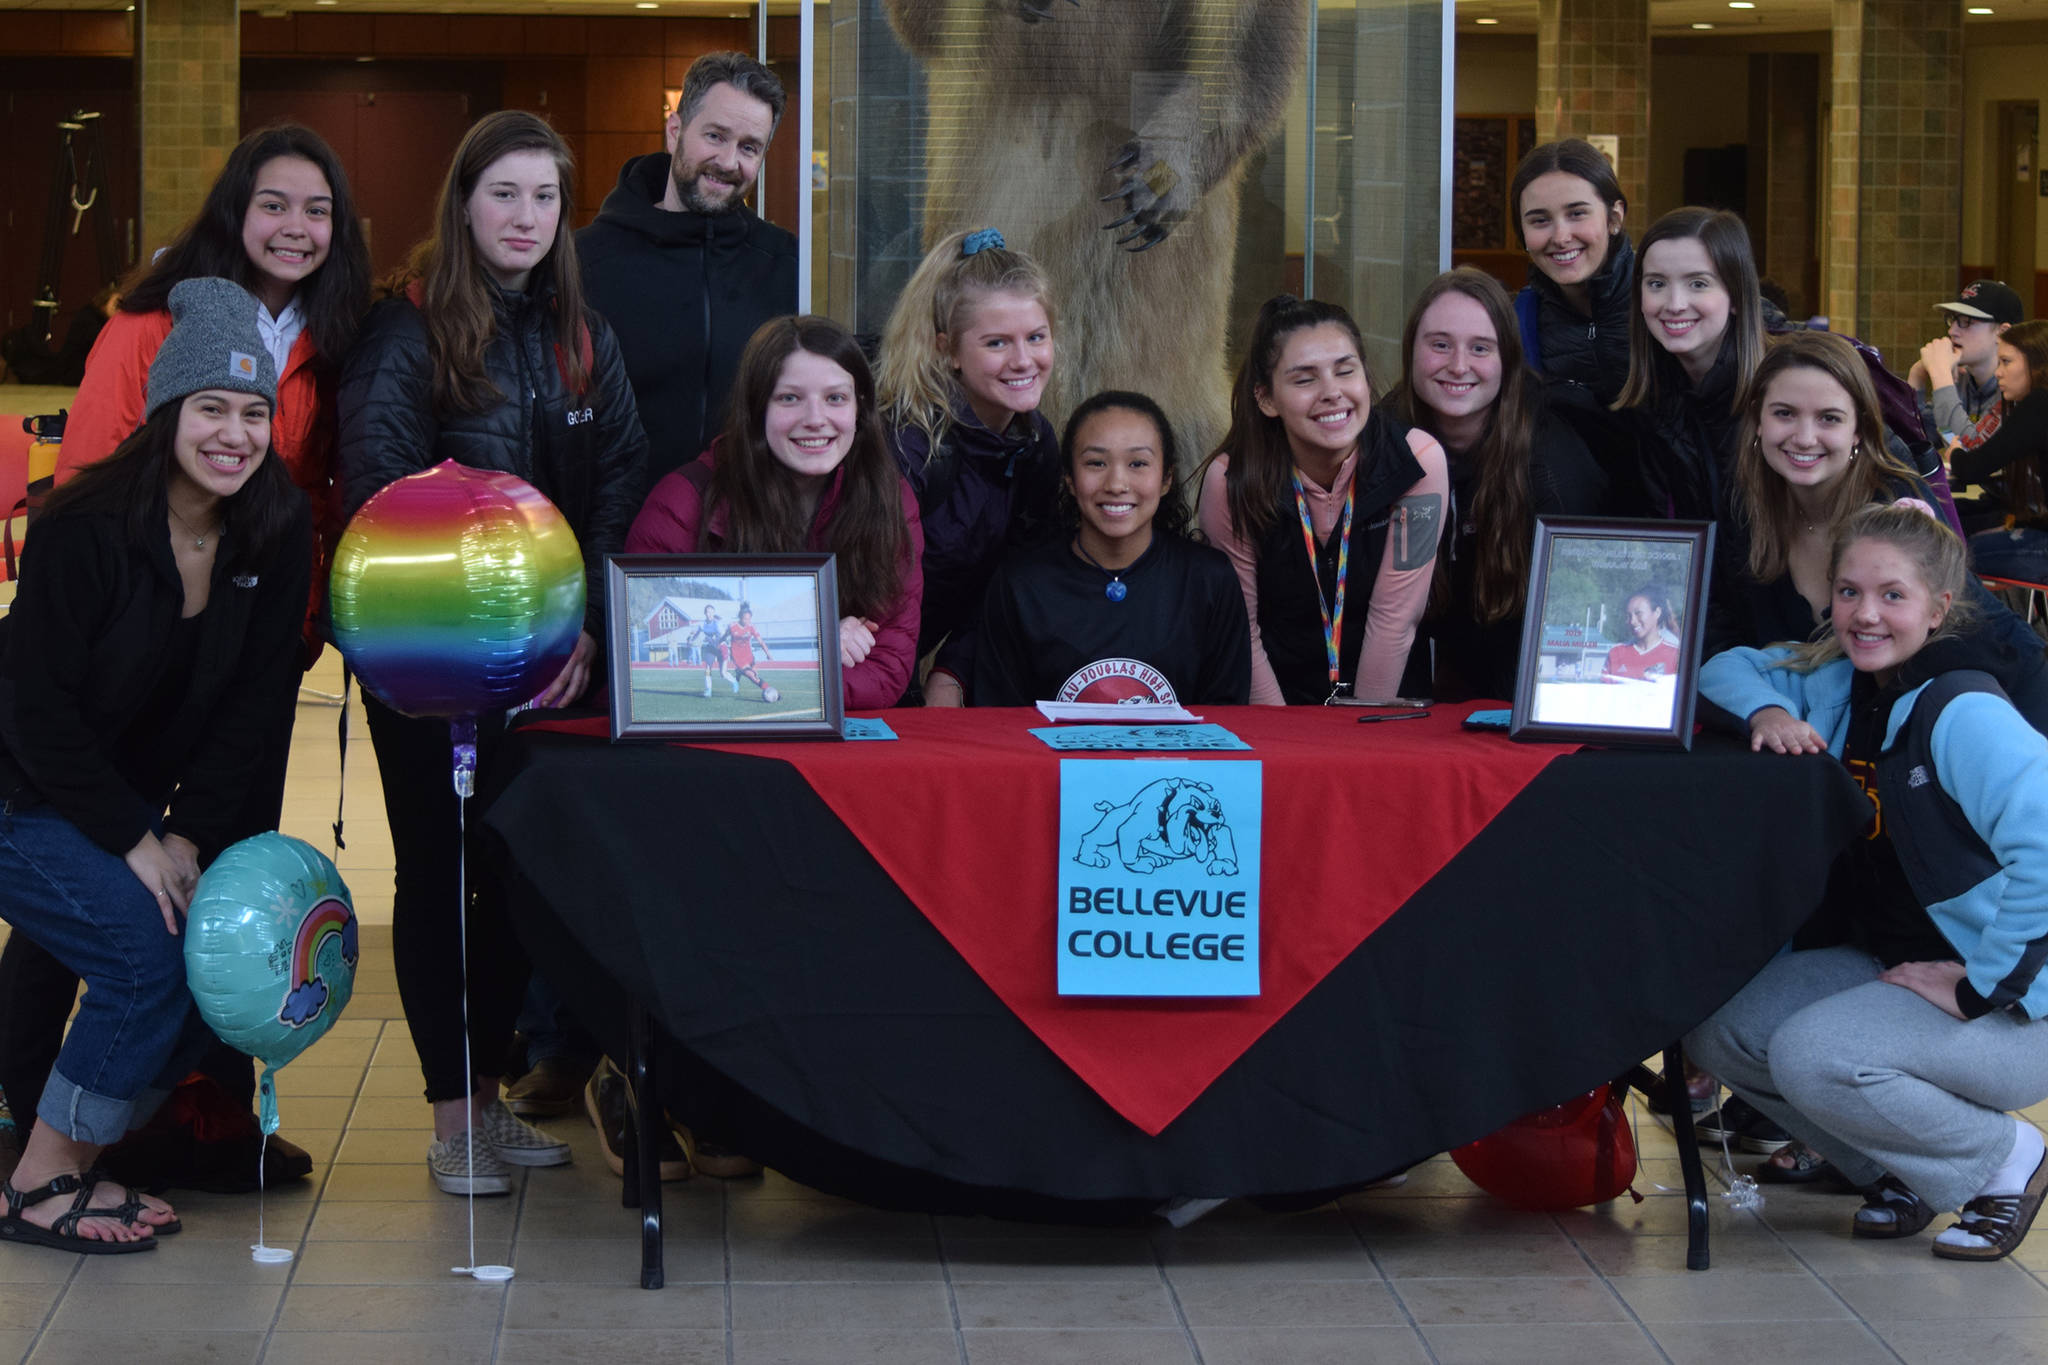 Juneau-Douglas High School senior Malia Miller (seated) poses with her teammates on the JDHS soccer team after signing a National Letter of Intent with Bellevue College at the JDHS commons on Thursday, March 14, 2019. (Nolin Ainsworth | Juneau Empire)